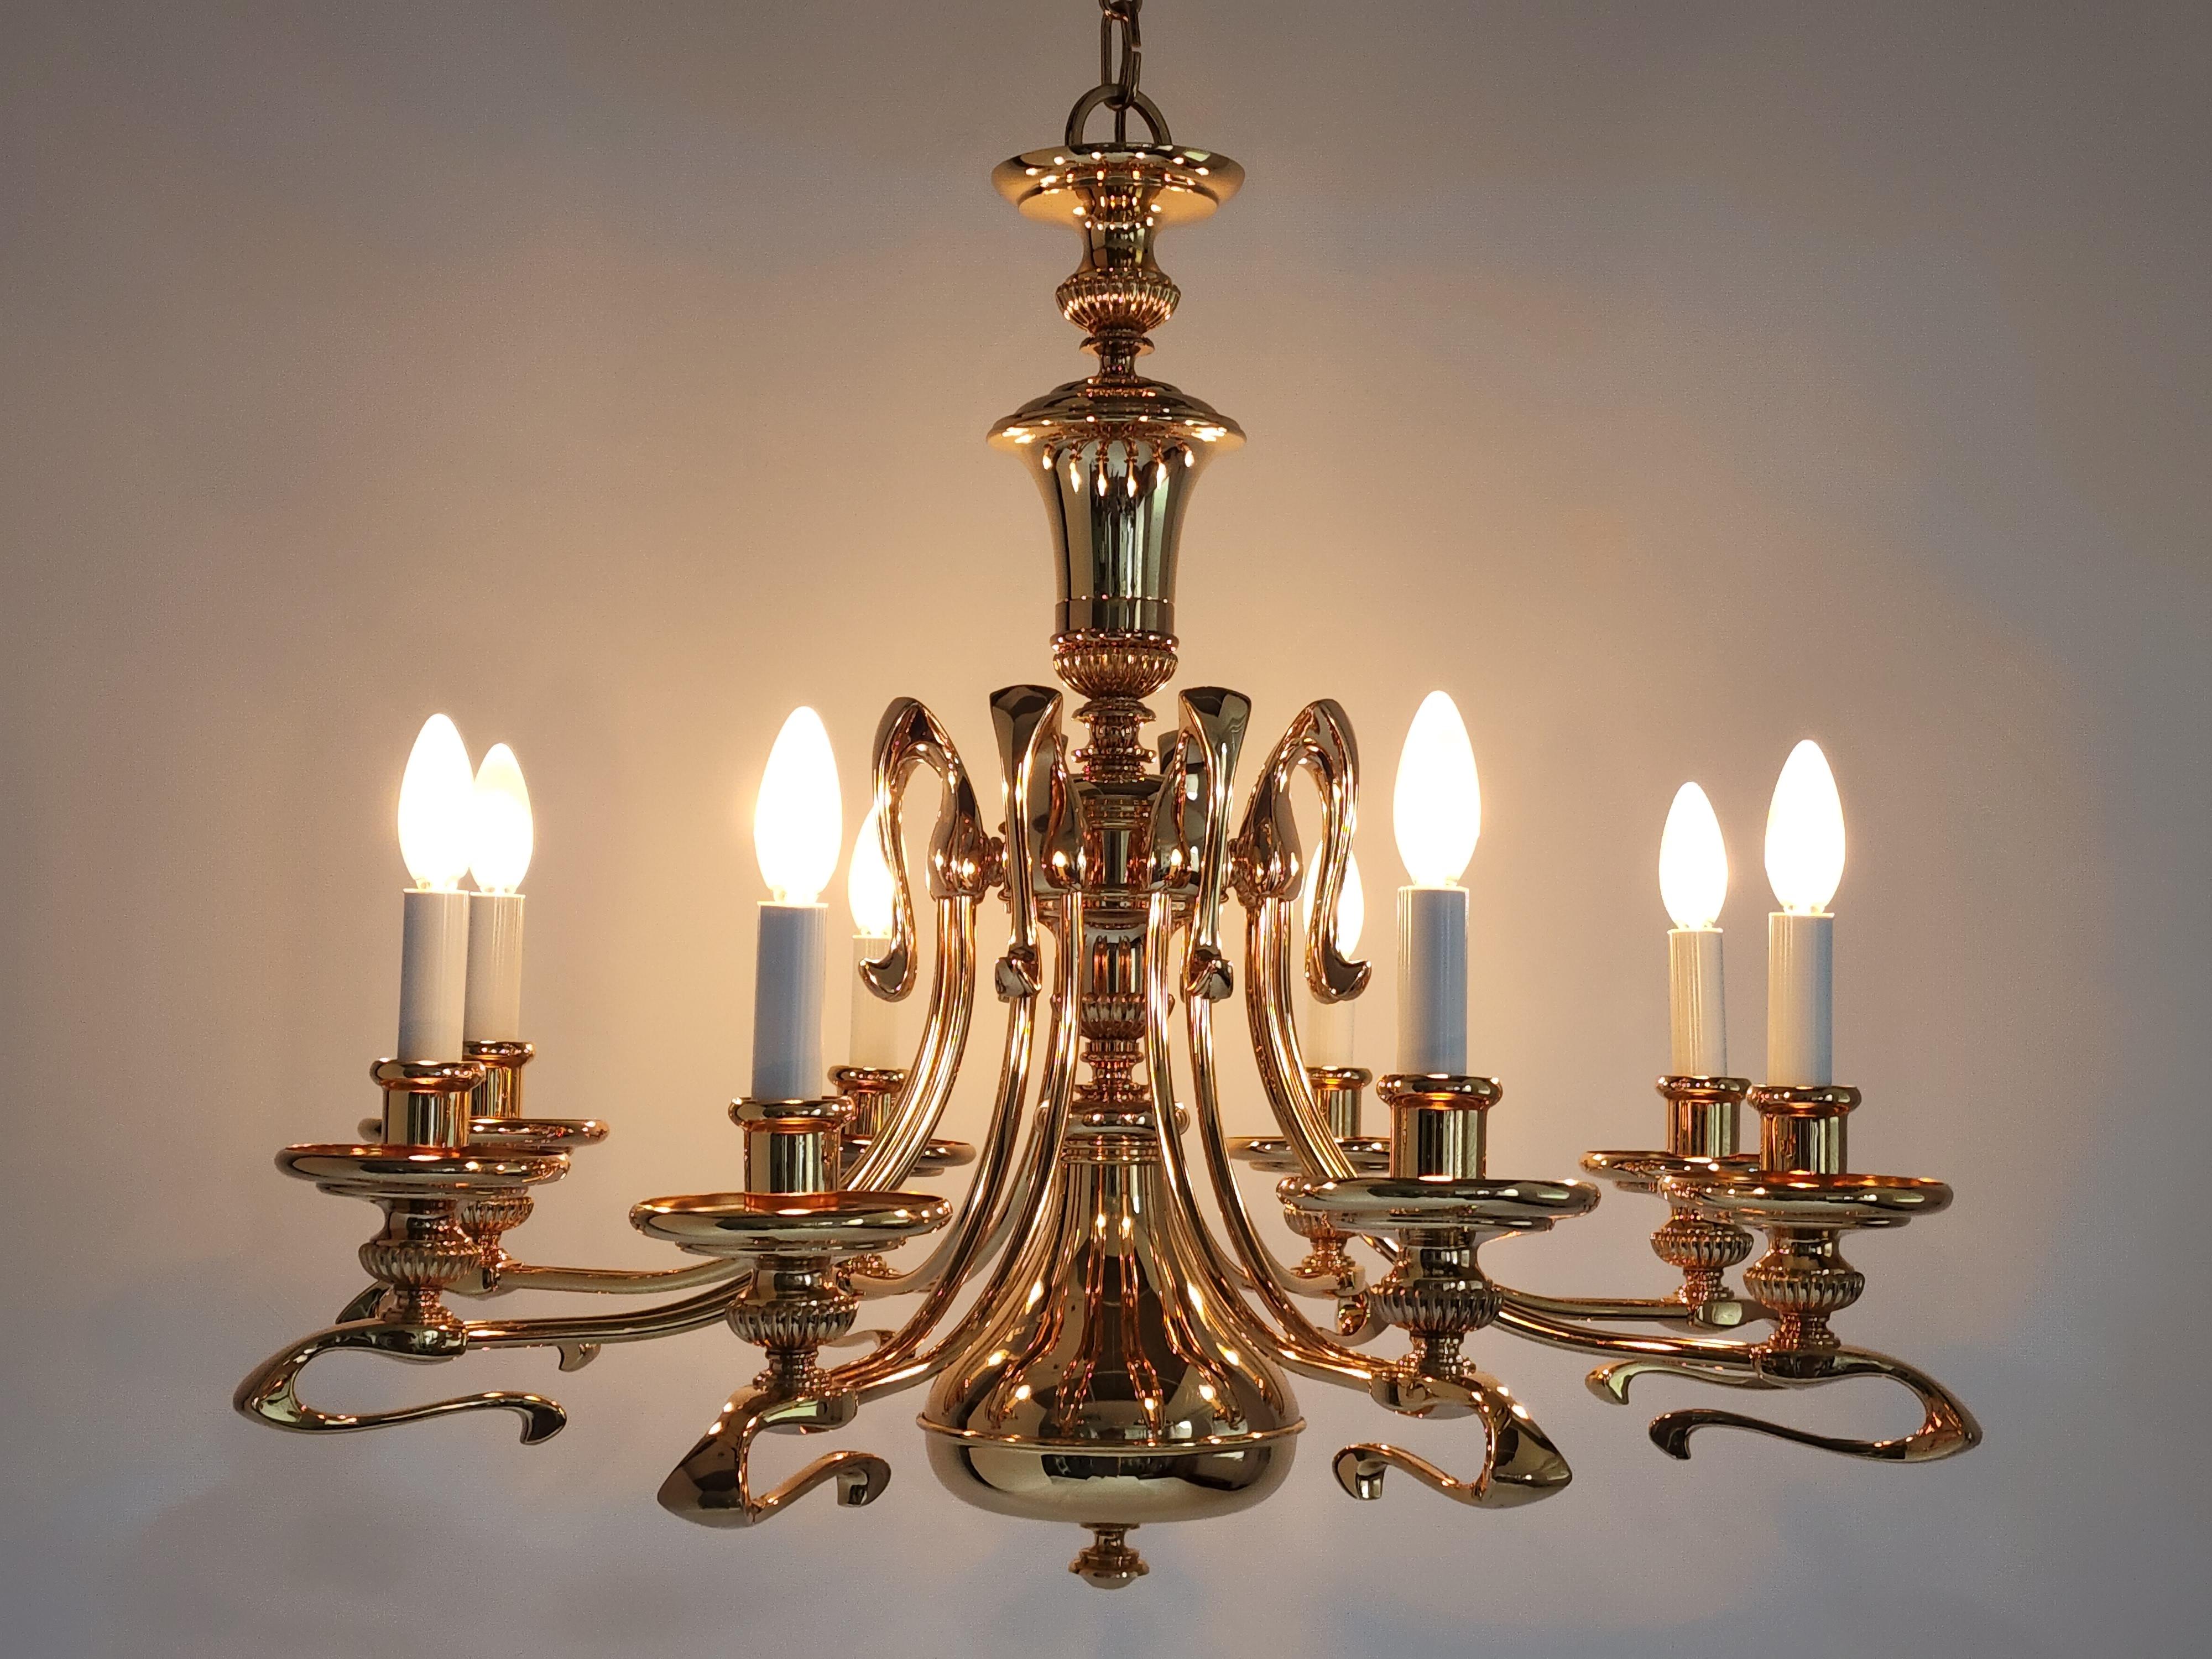 1980s Massive Art Nouveau Style Gold Plated Chandelier, Italy For Sale 4